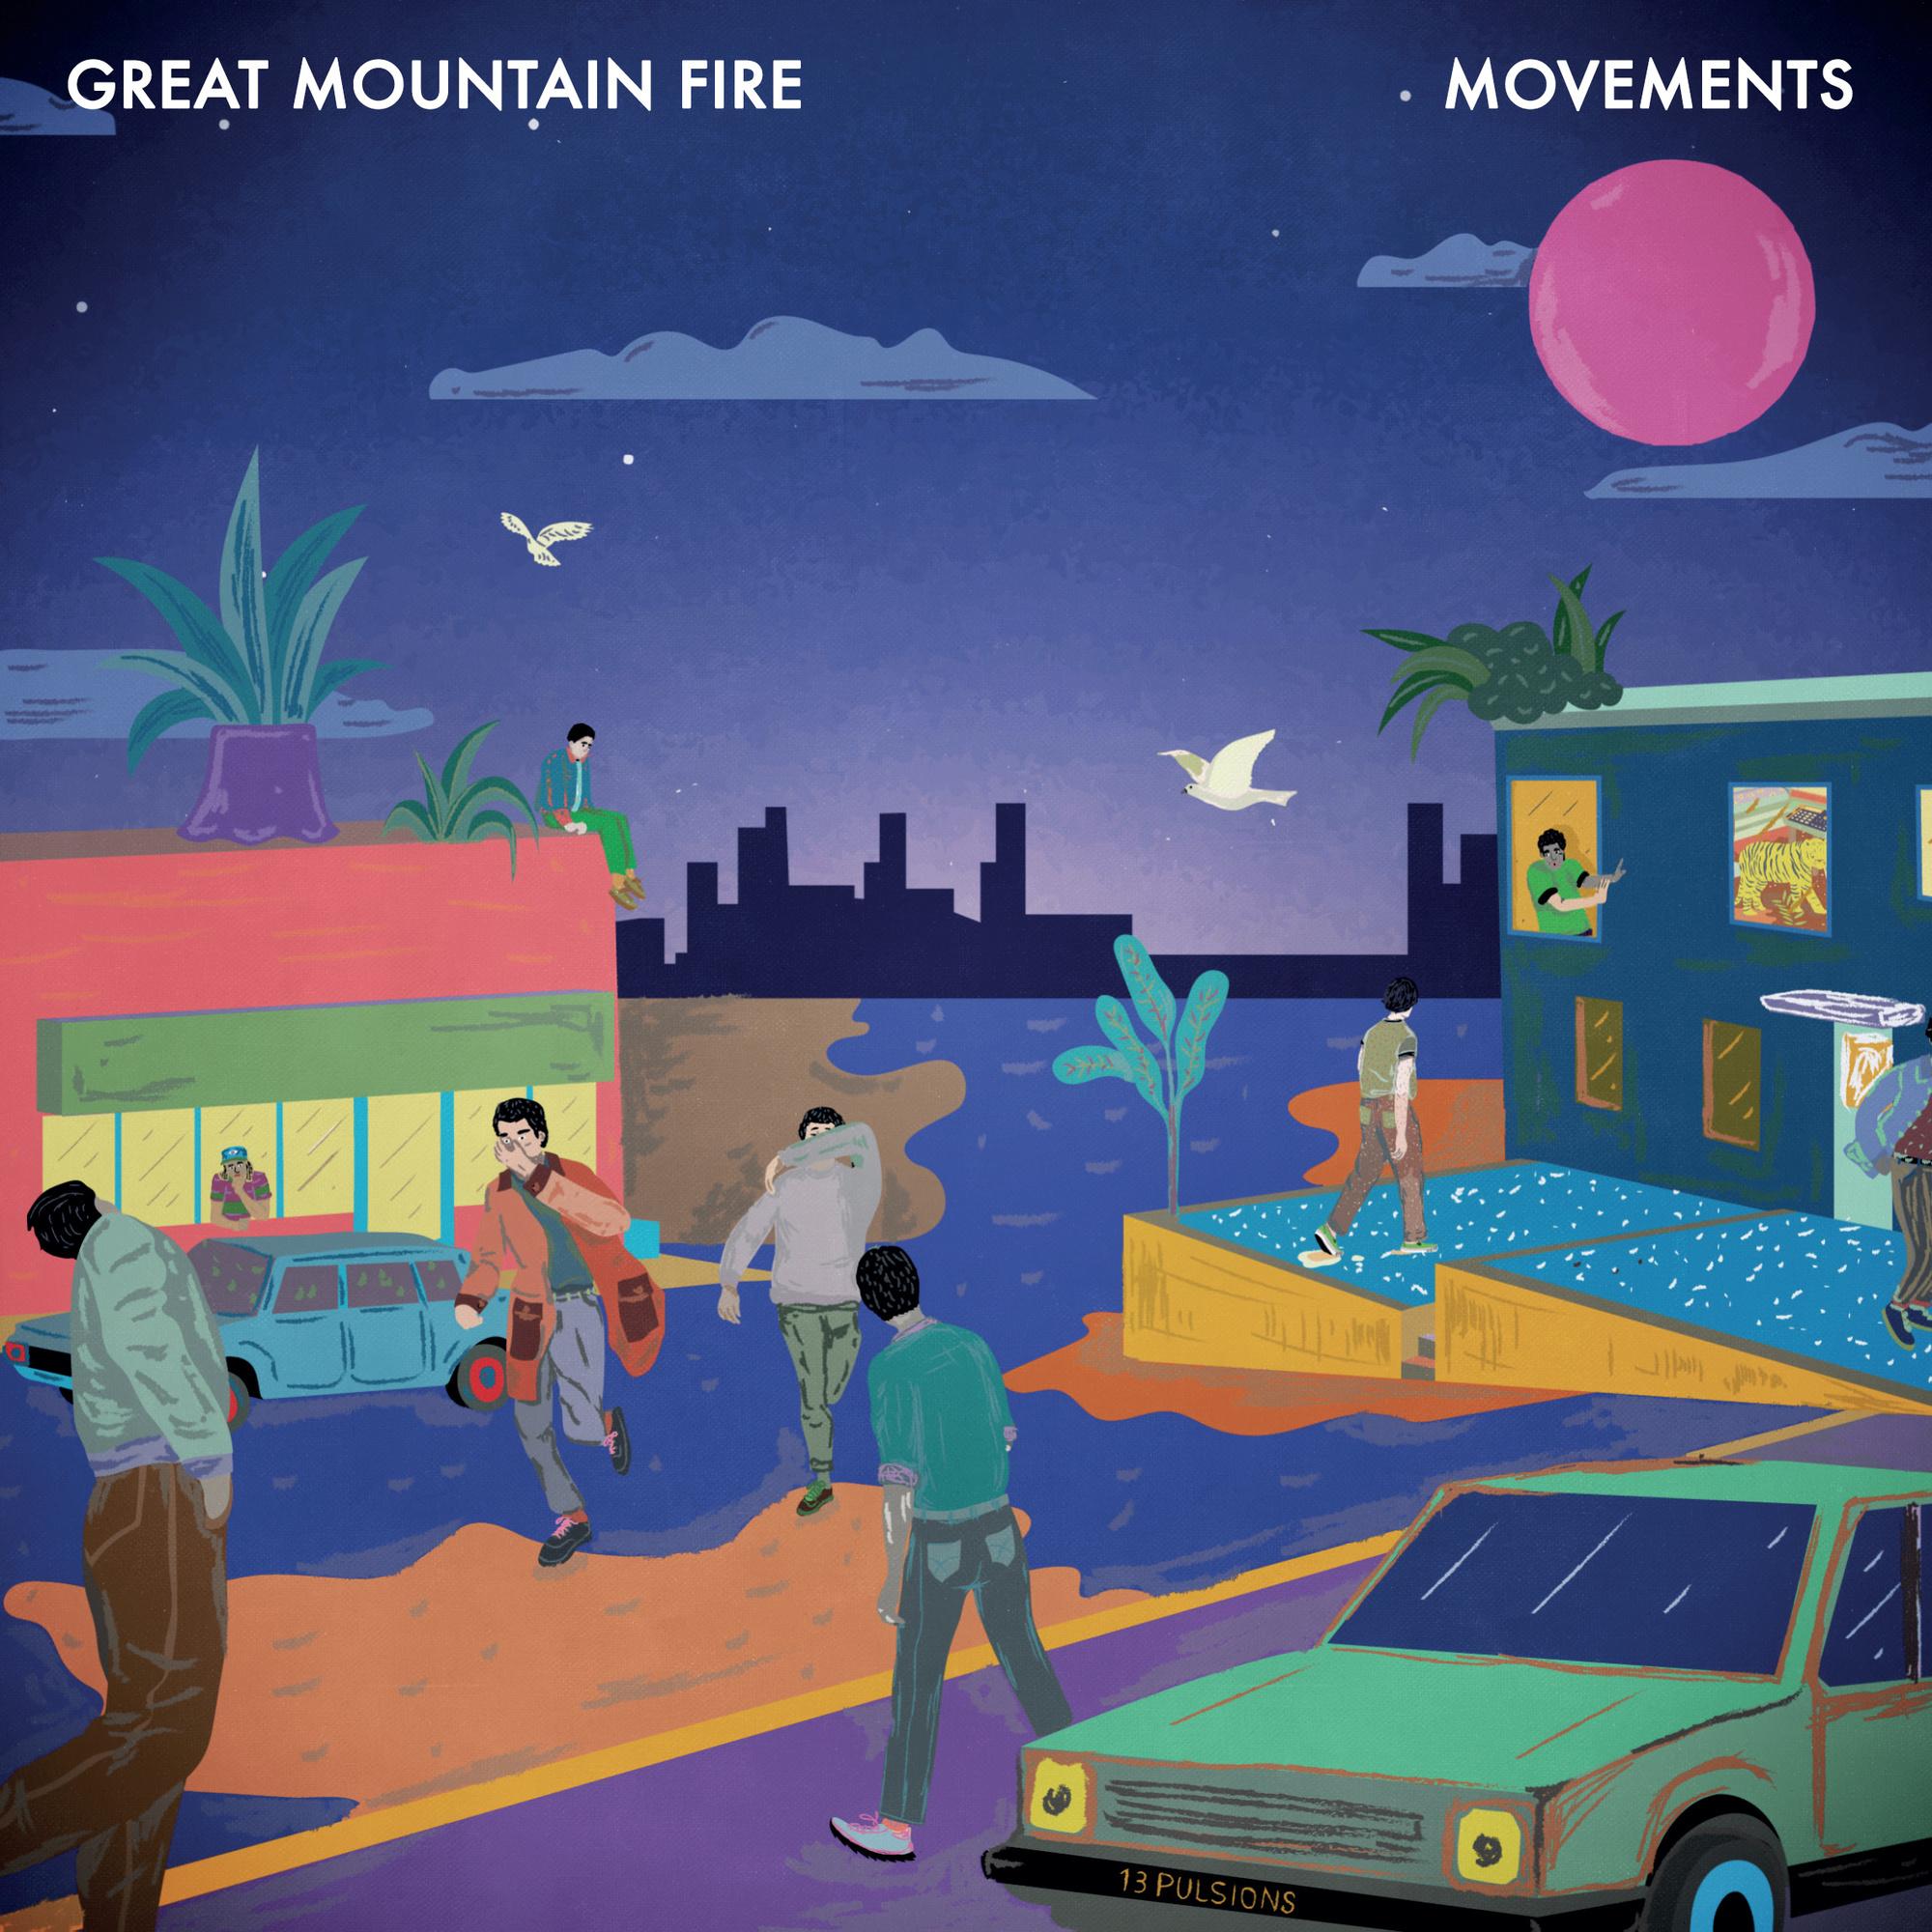 Great Mountain Fire, vers l'Everest?